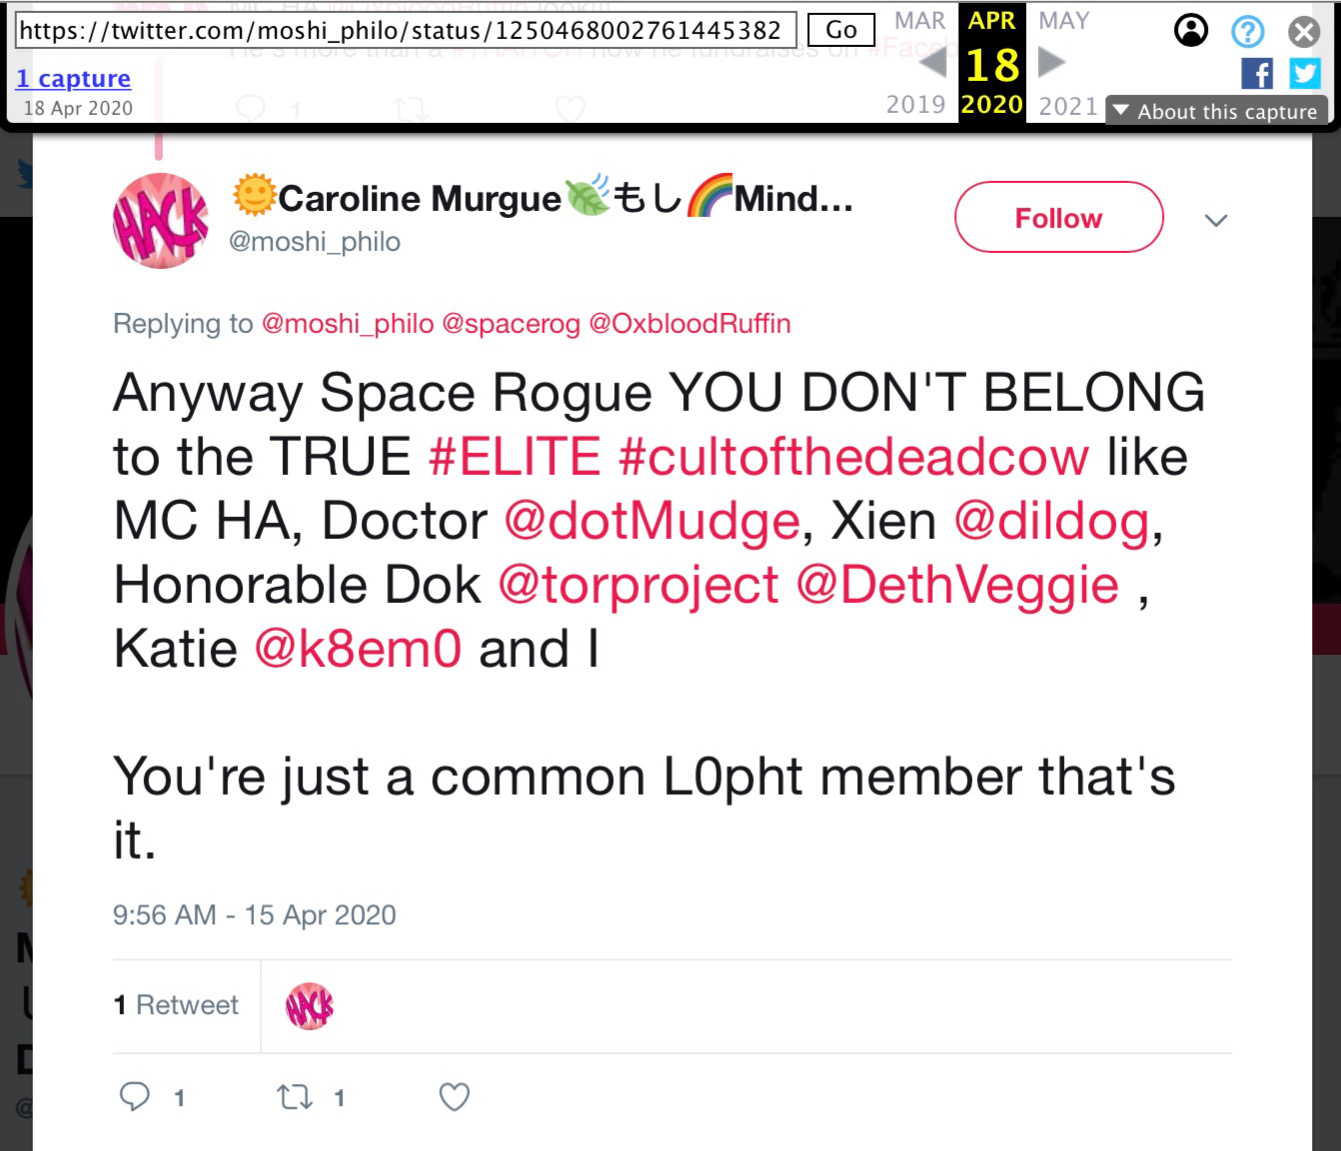 15 Apr 2020 tweet from @moshi_philo: Anyway Space Rogue YOU DON'T BELONG TO THE TRUE #ELITE #cultofthedeadcow like MC HA, Doctor @dotMudge, Xien @dildog, Honorable Dok @torproject @DethVeggie, Katie @k8em0 and I. You're just a common L0pht member that's it.